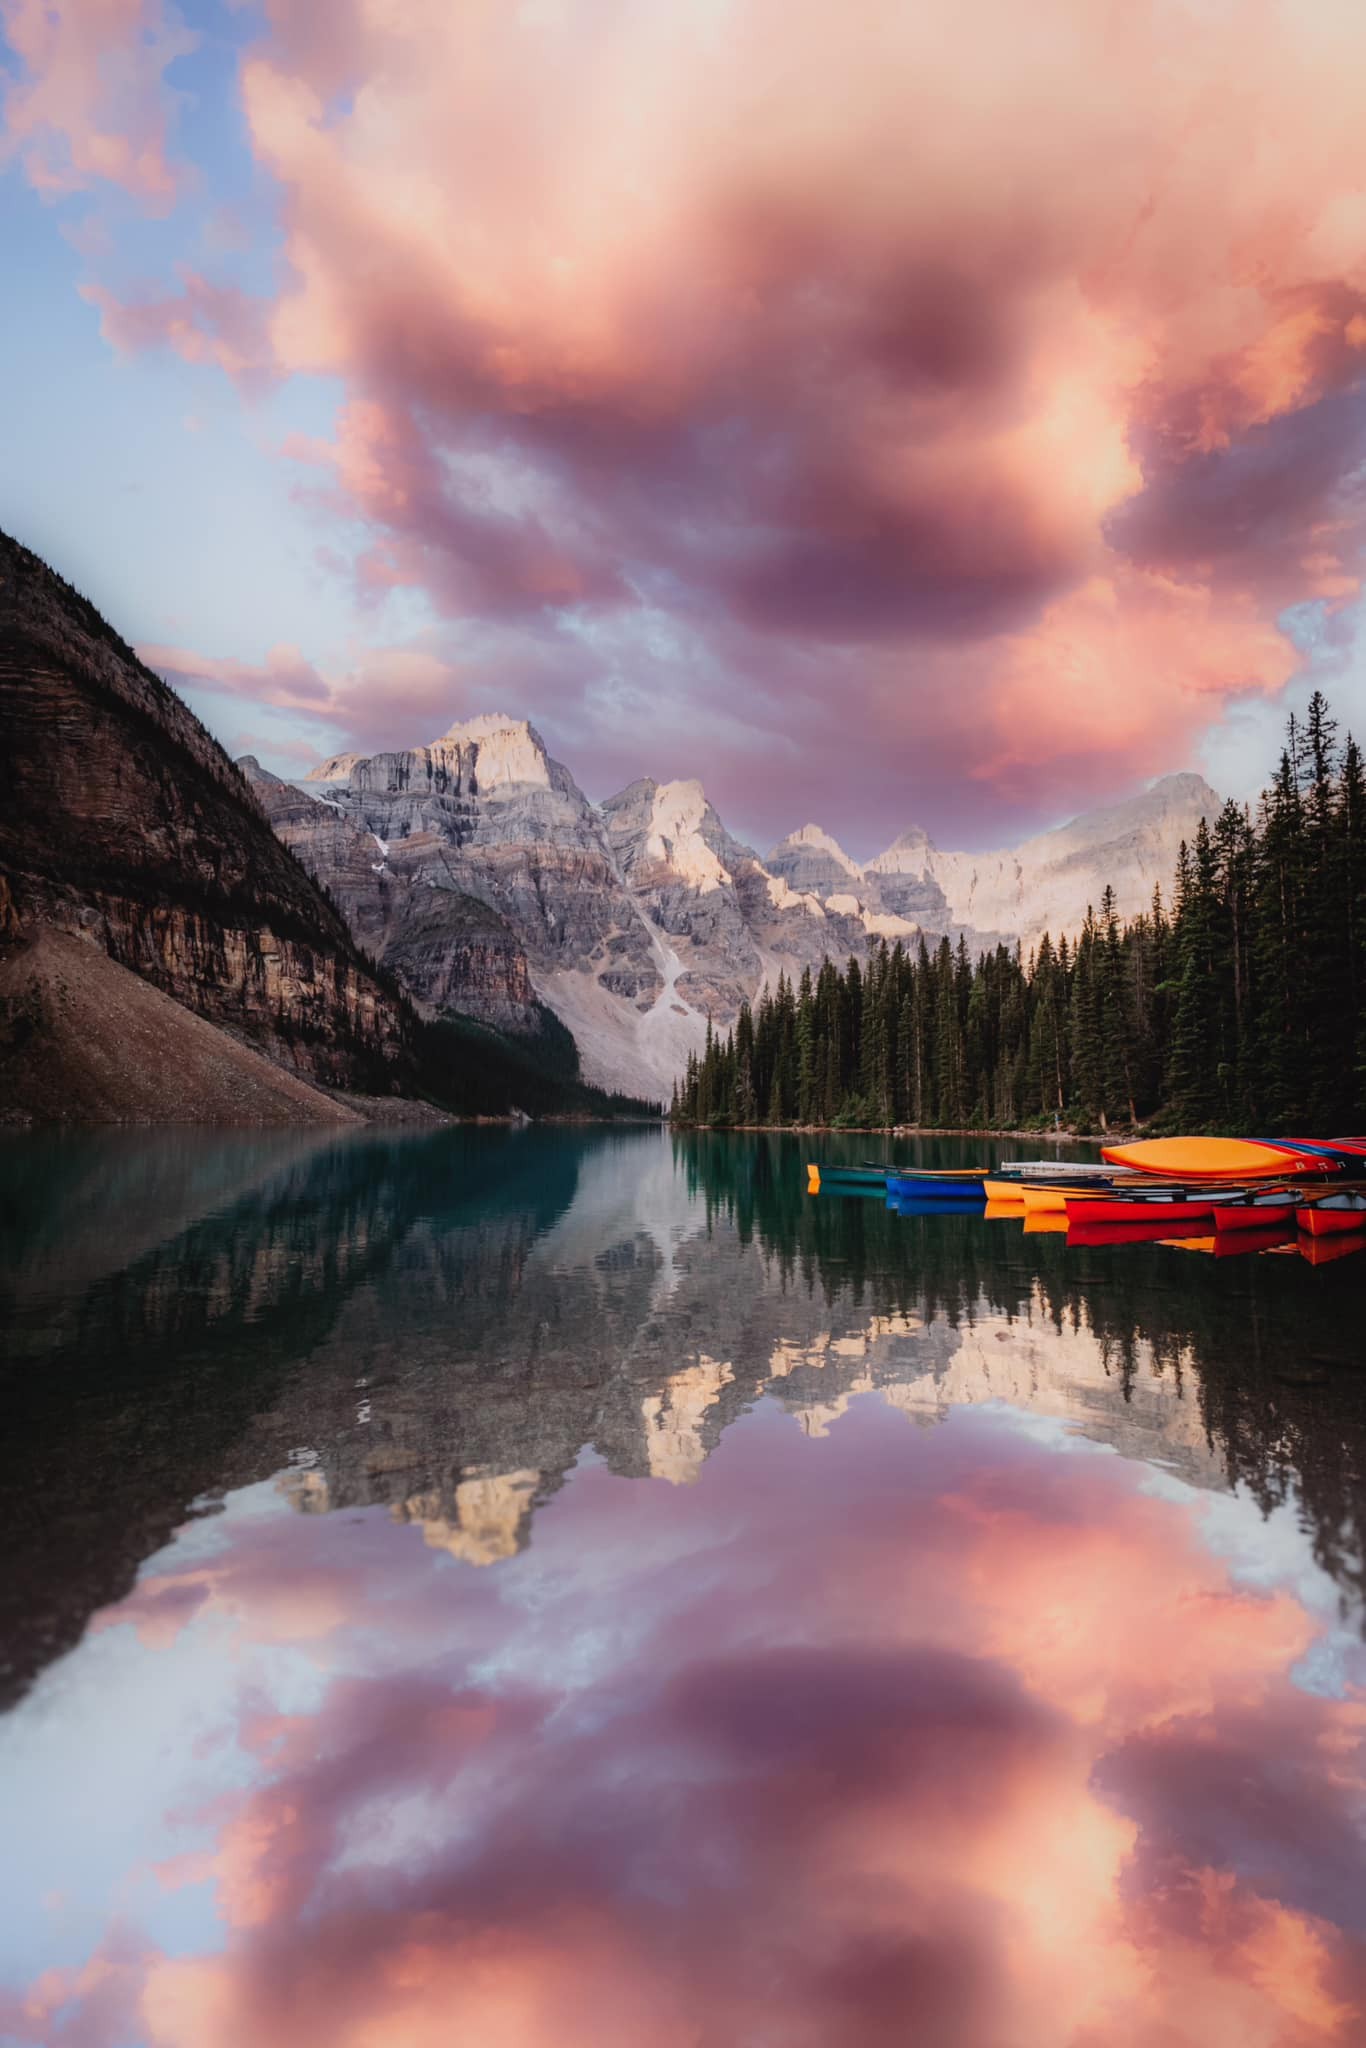 Tips for Your Moraine Lake Adventure